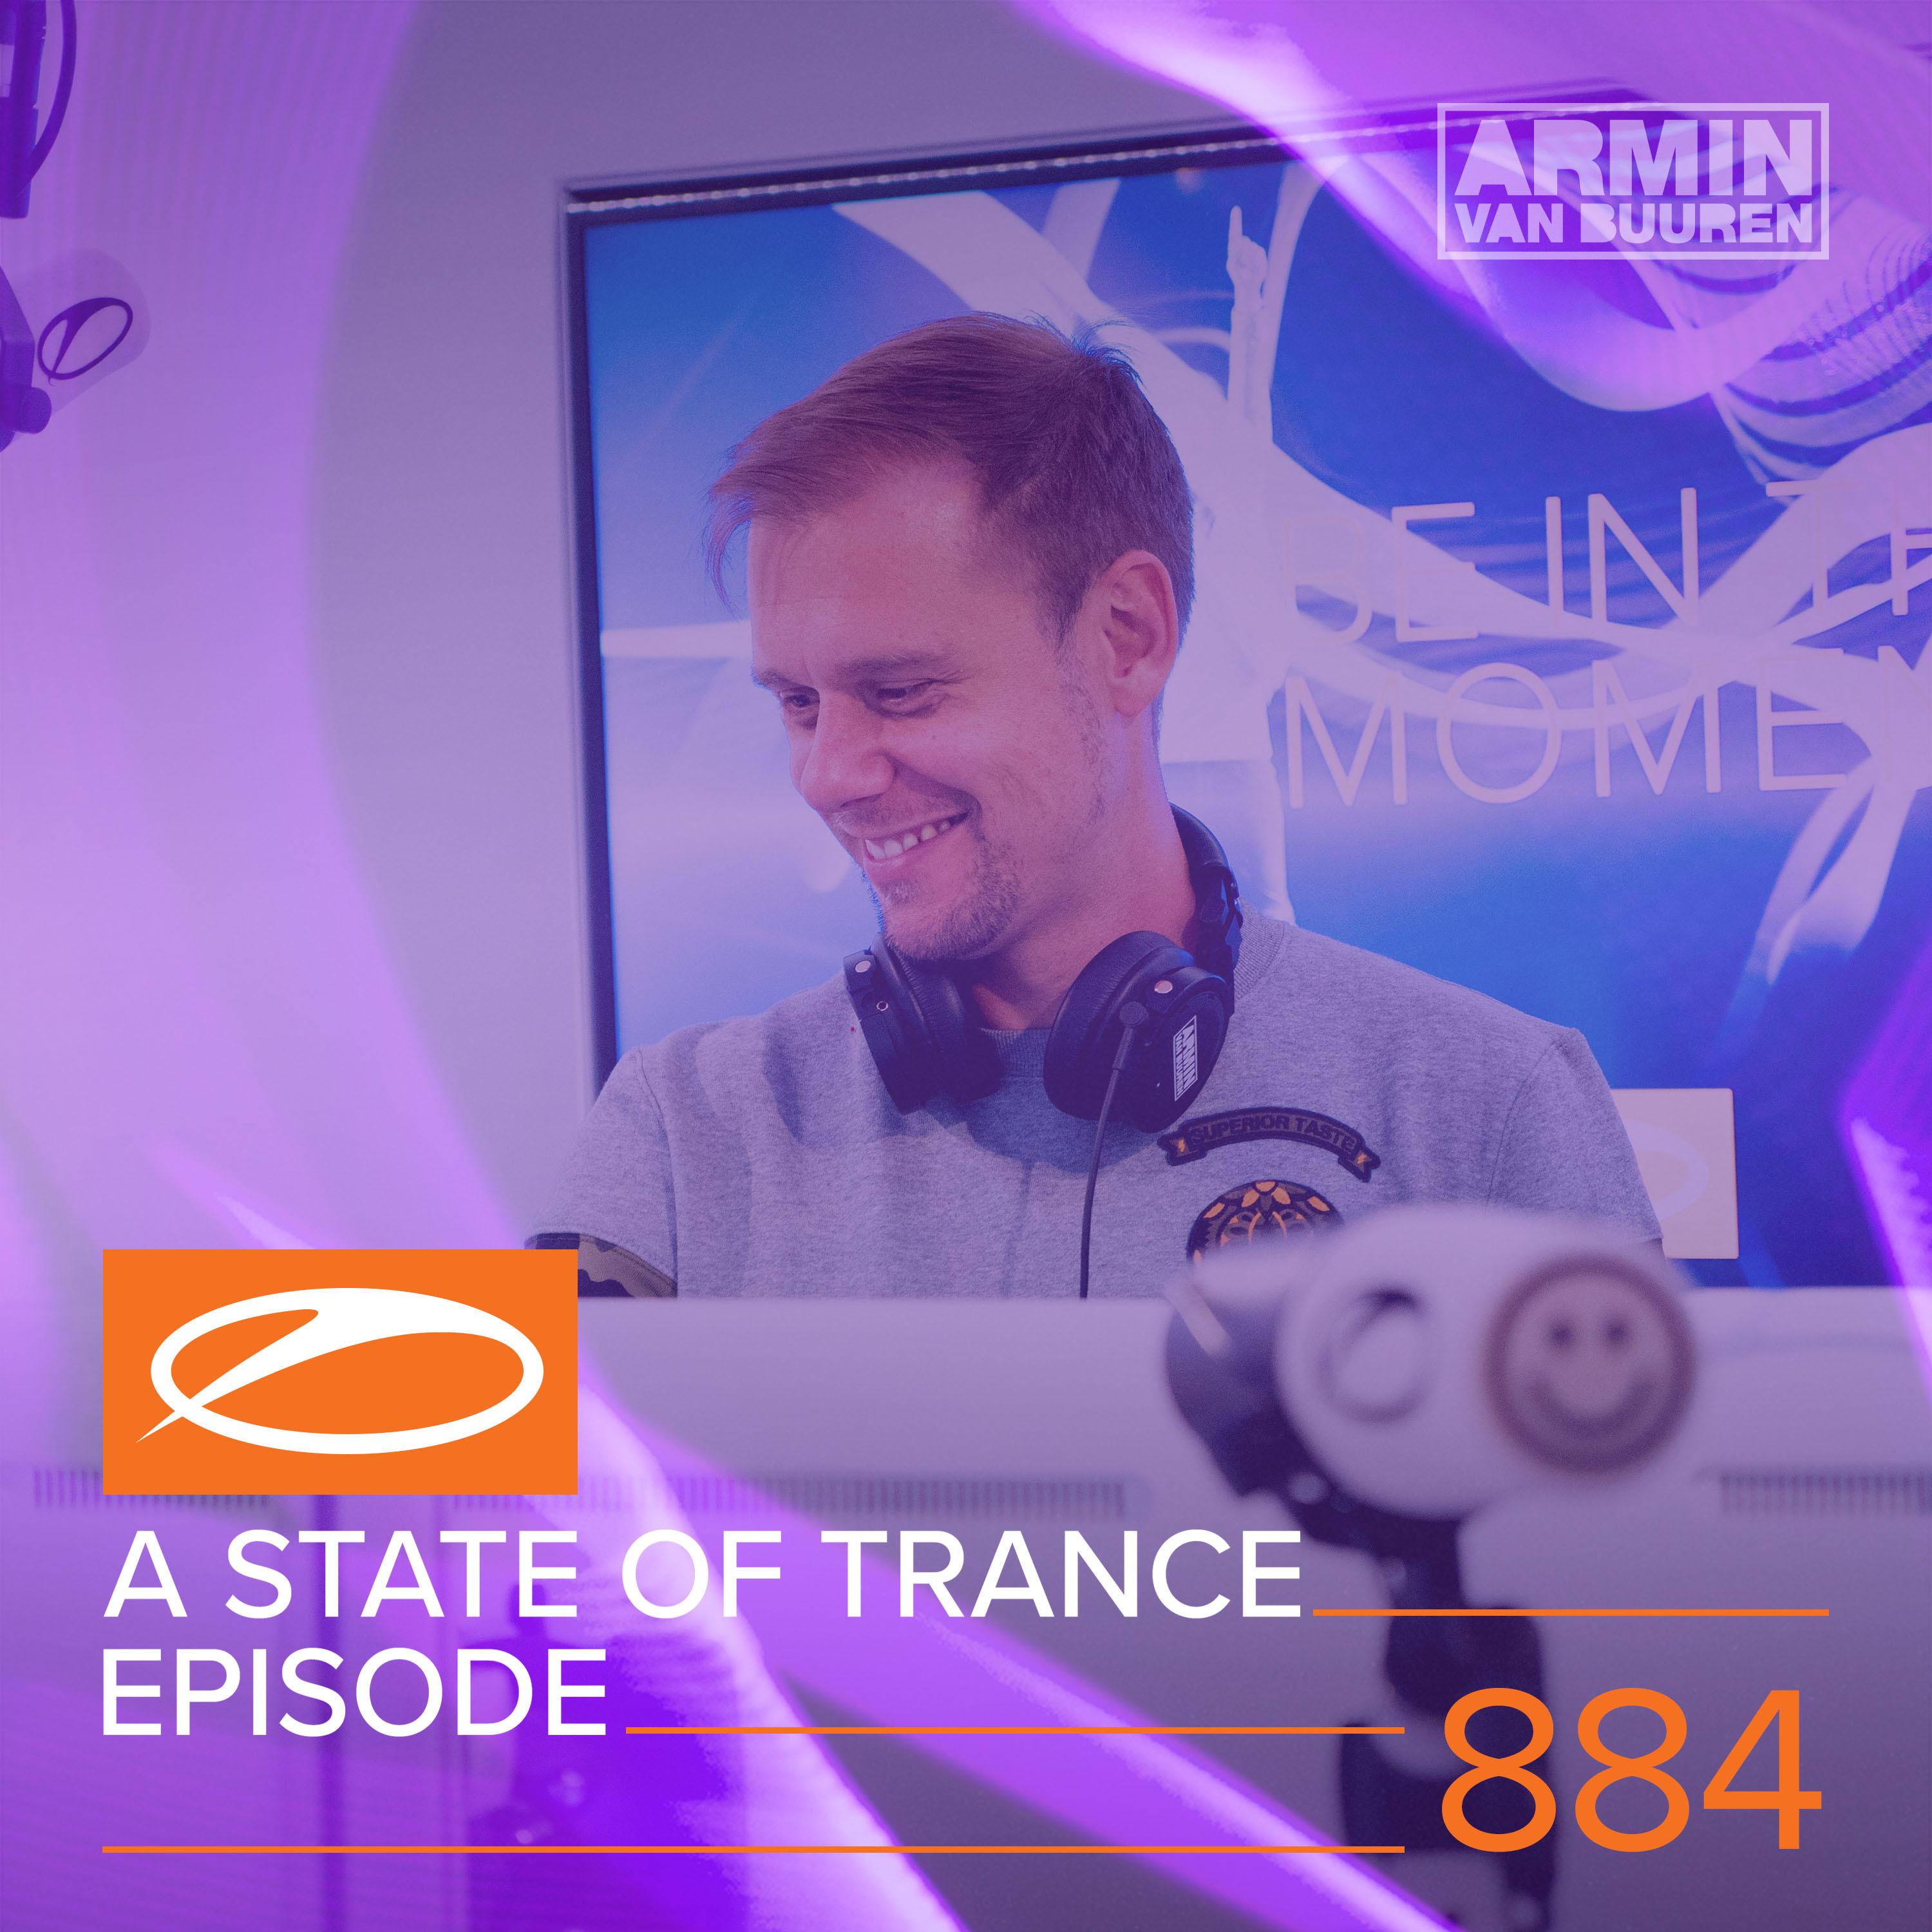 A State Of Trance (ASOT 884) (Track Recap, Pt. 1)